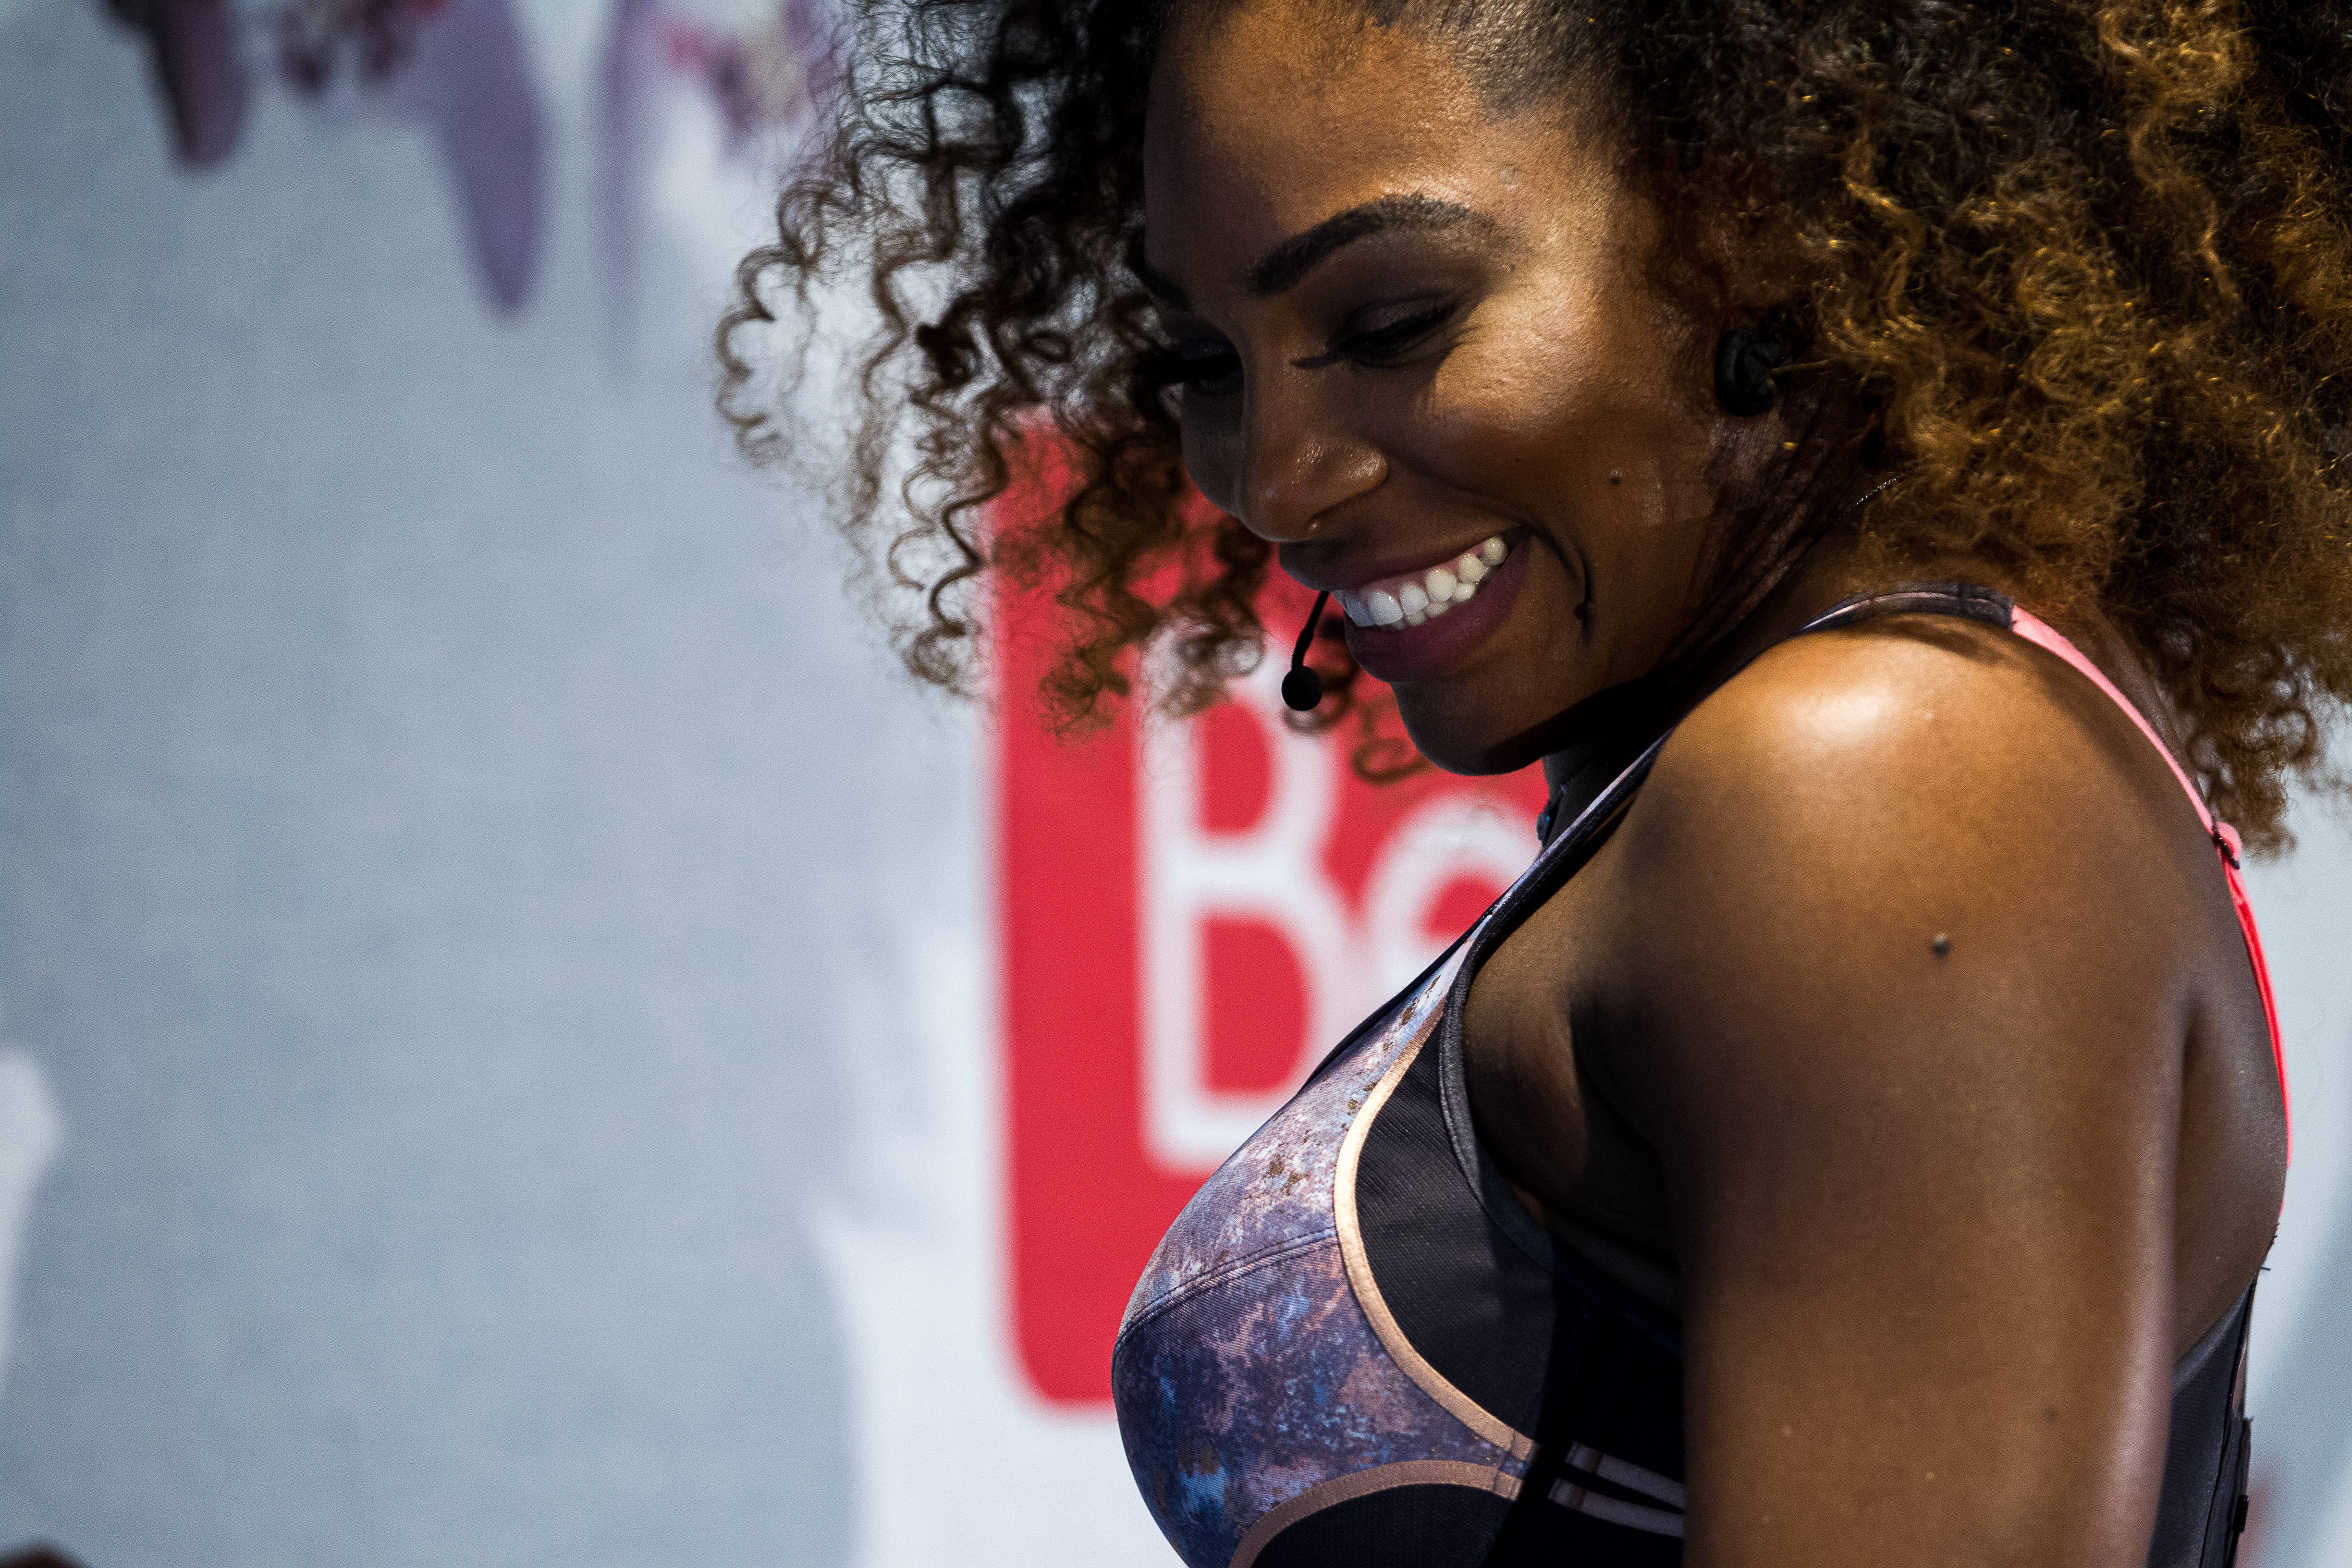 andrew christoff recommends serena williams toppless pic